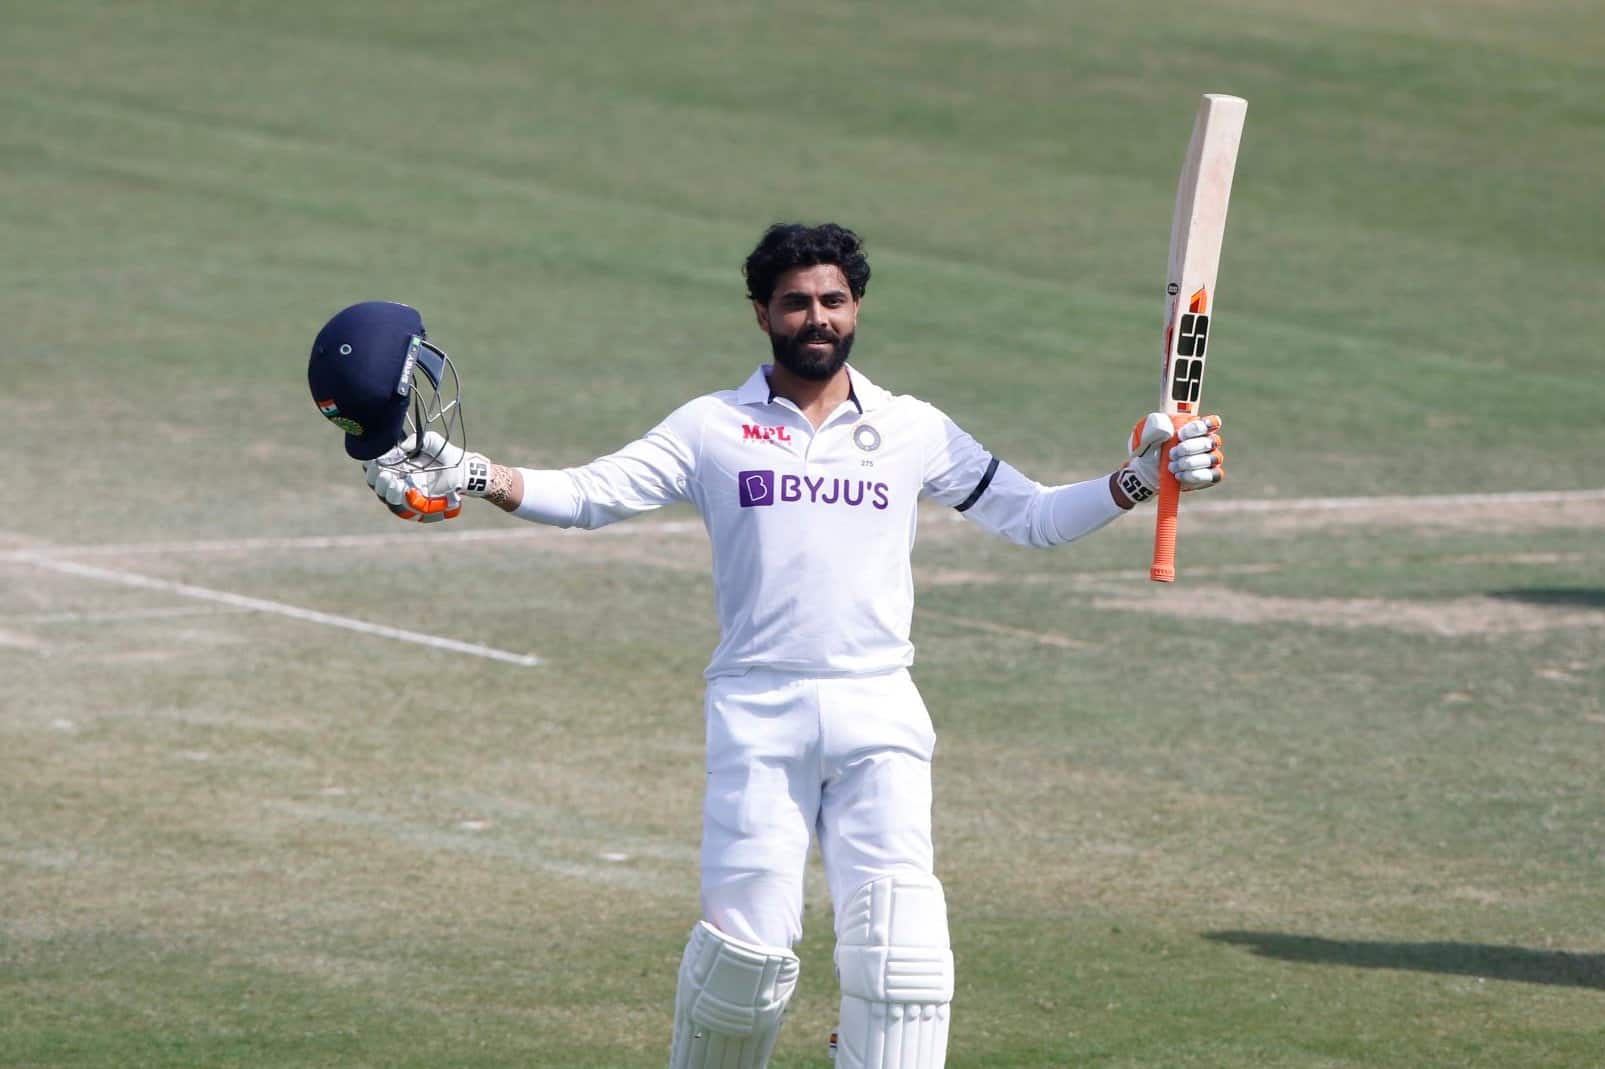 Why does India Need Ravindra Jadeja, The Batter, To Step Up In The WTC Finals?